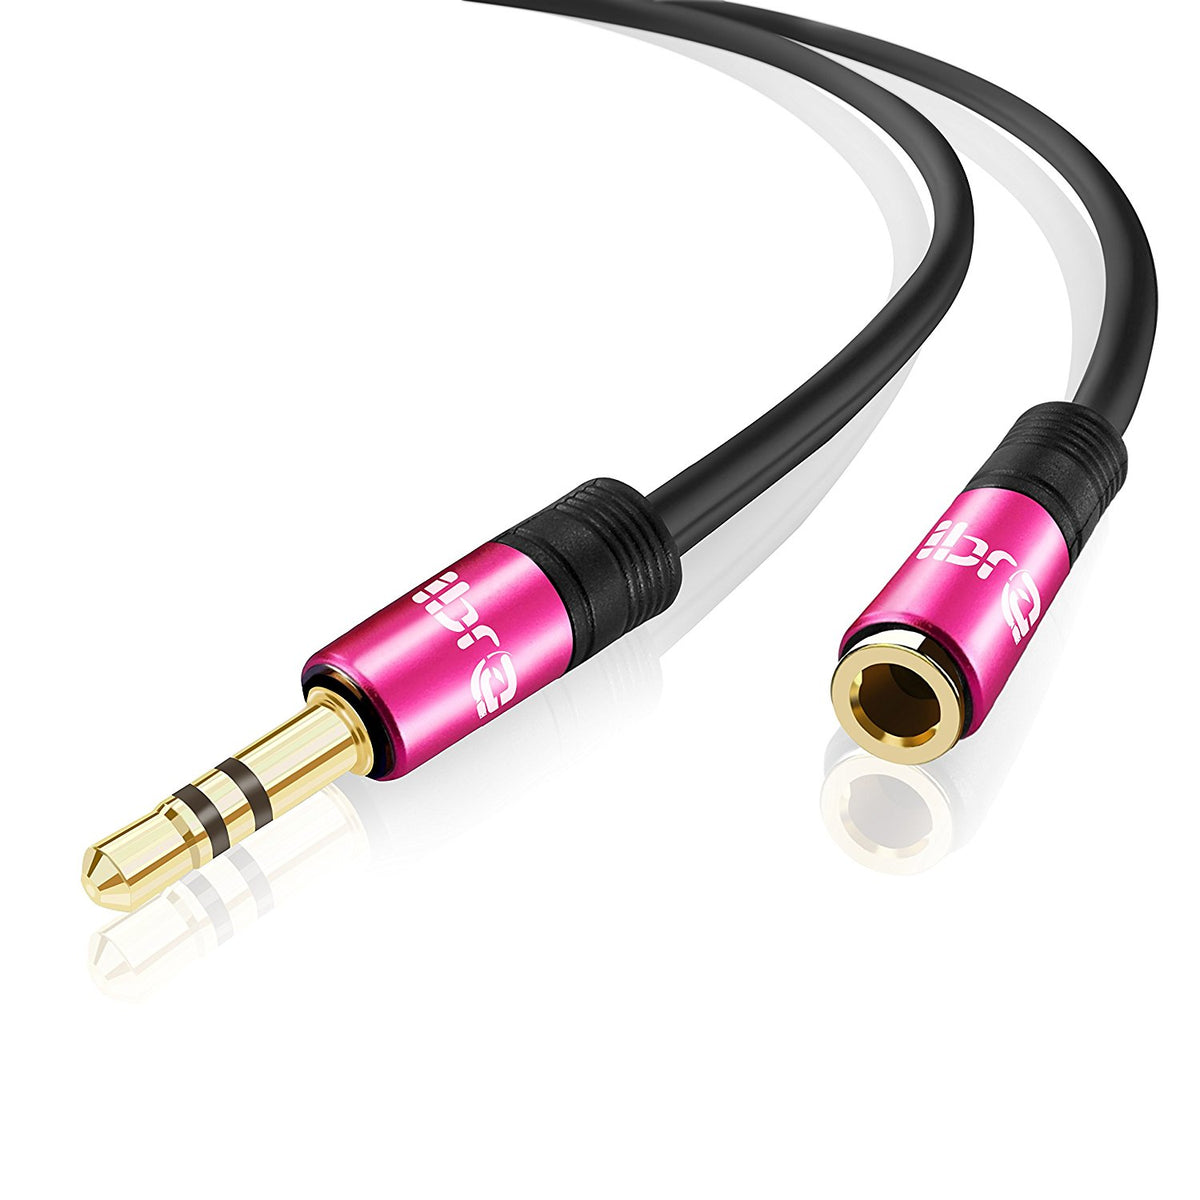 IBRA 0.5M Stereo Jack Extension Cable 3.5mm Male > 3.5mm Female - Pink